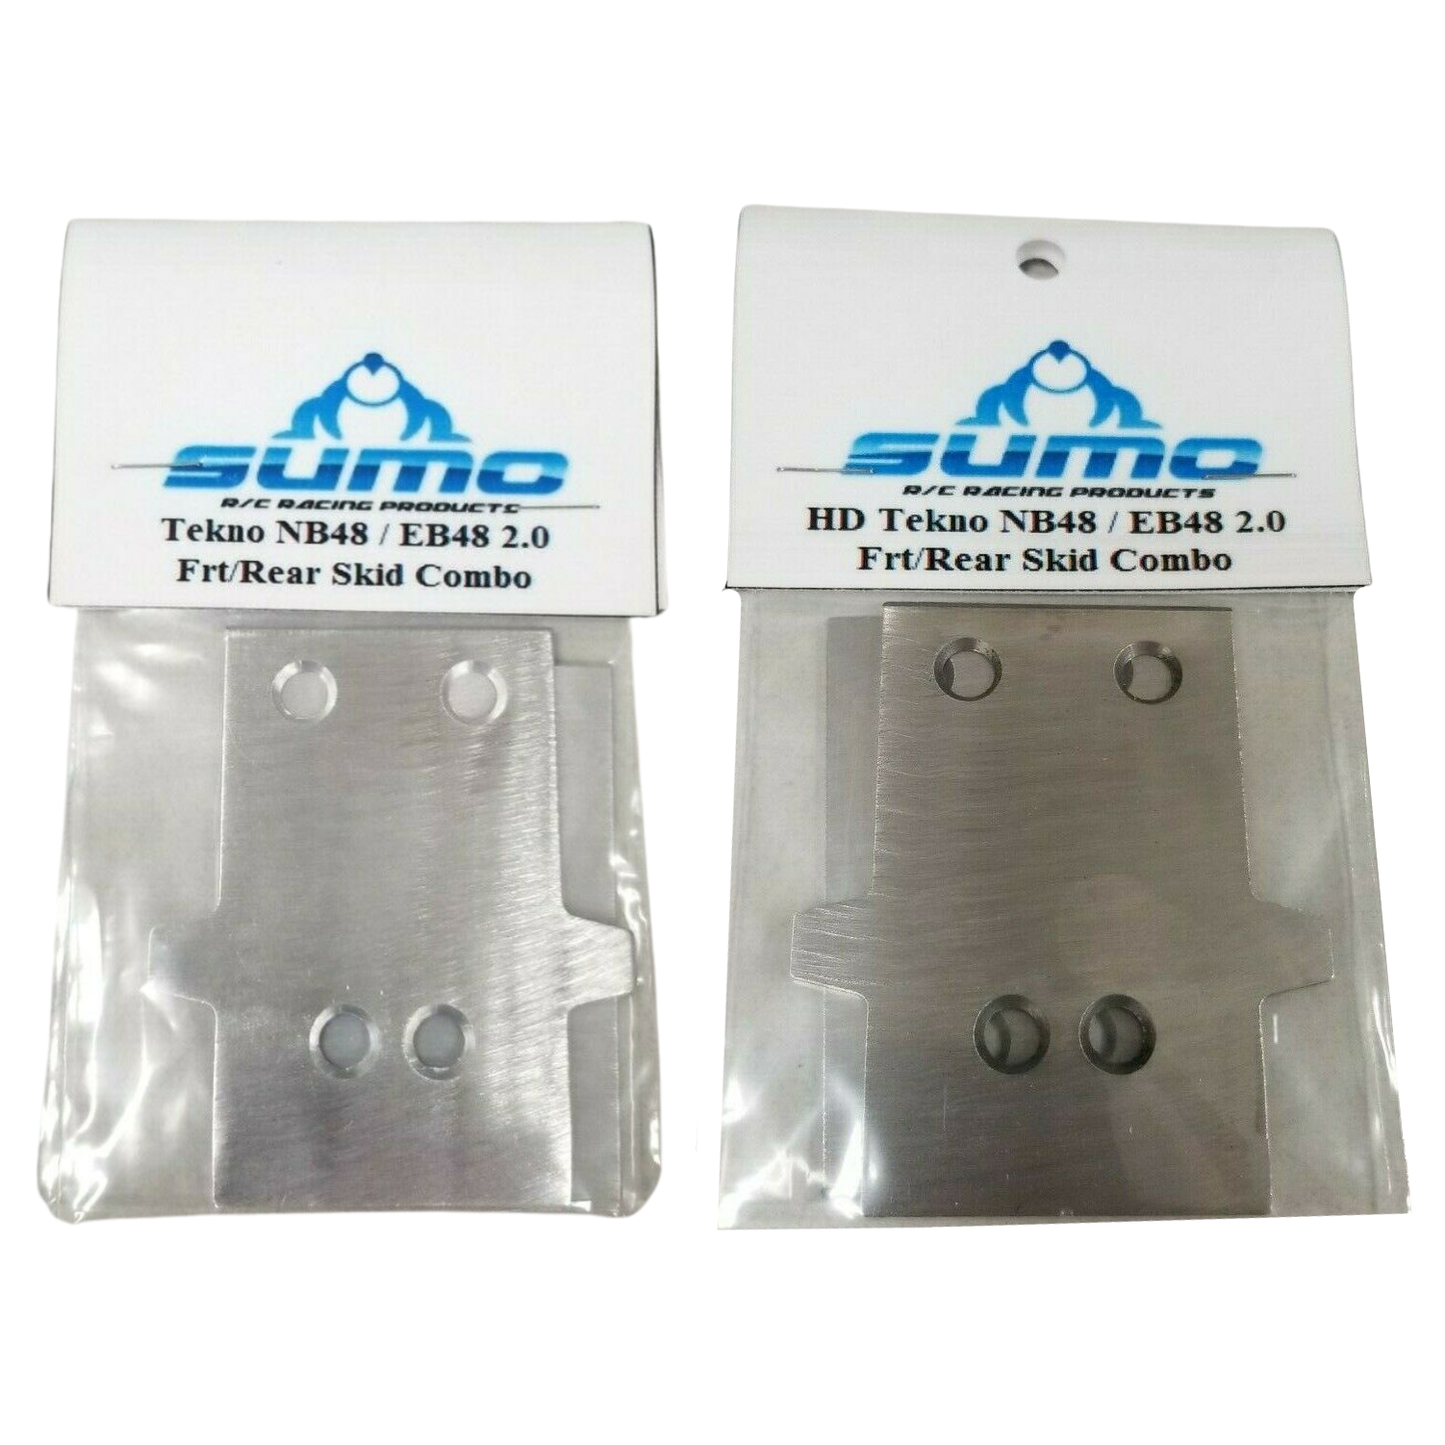 Sumo Racing Skid Plates for Tekno NB48/EB48 2.0 Buggy